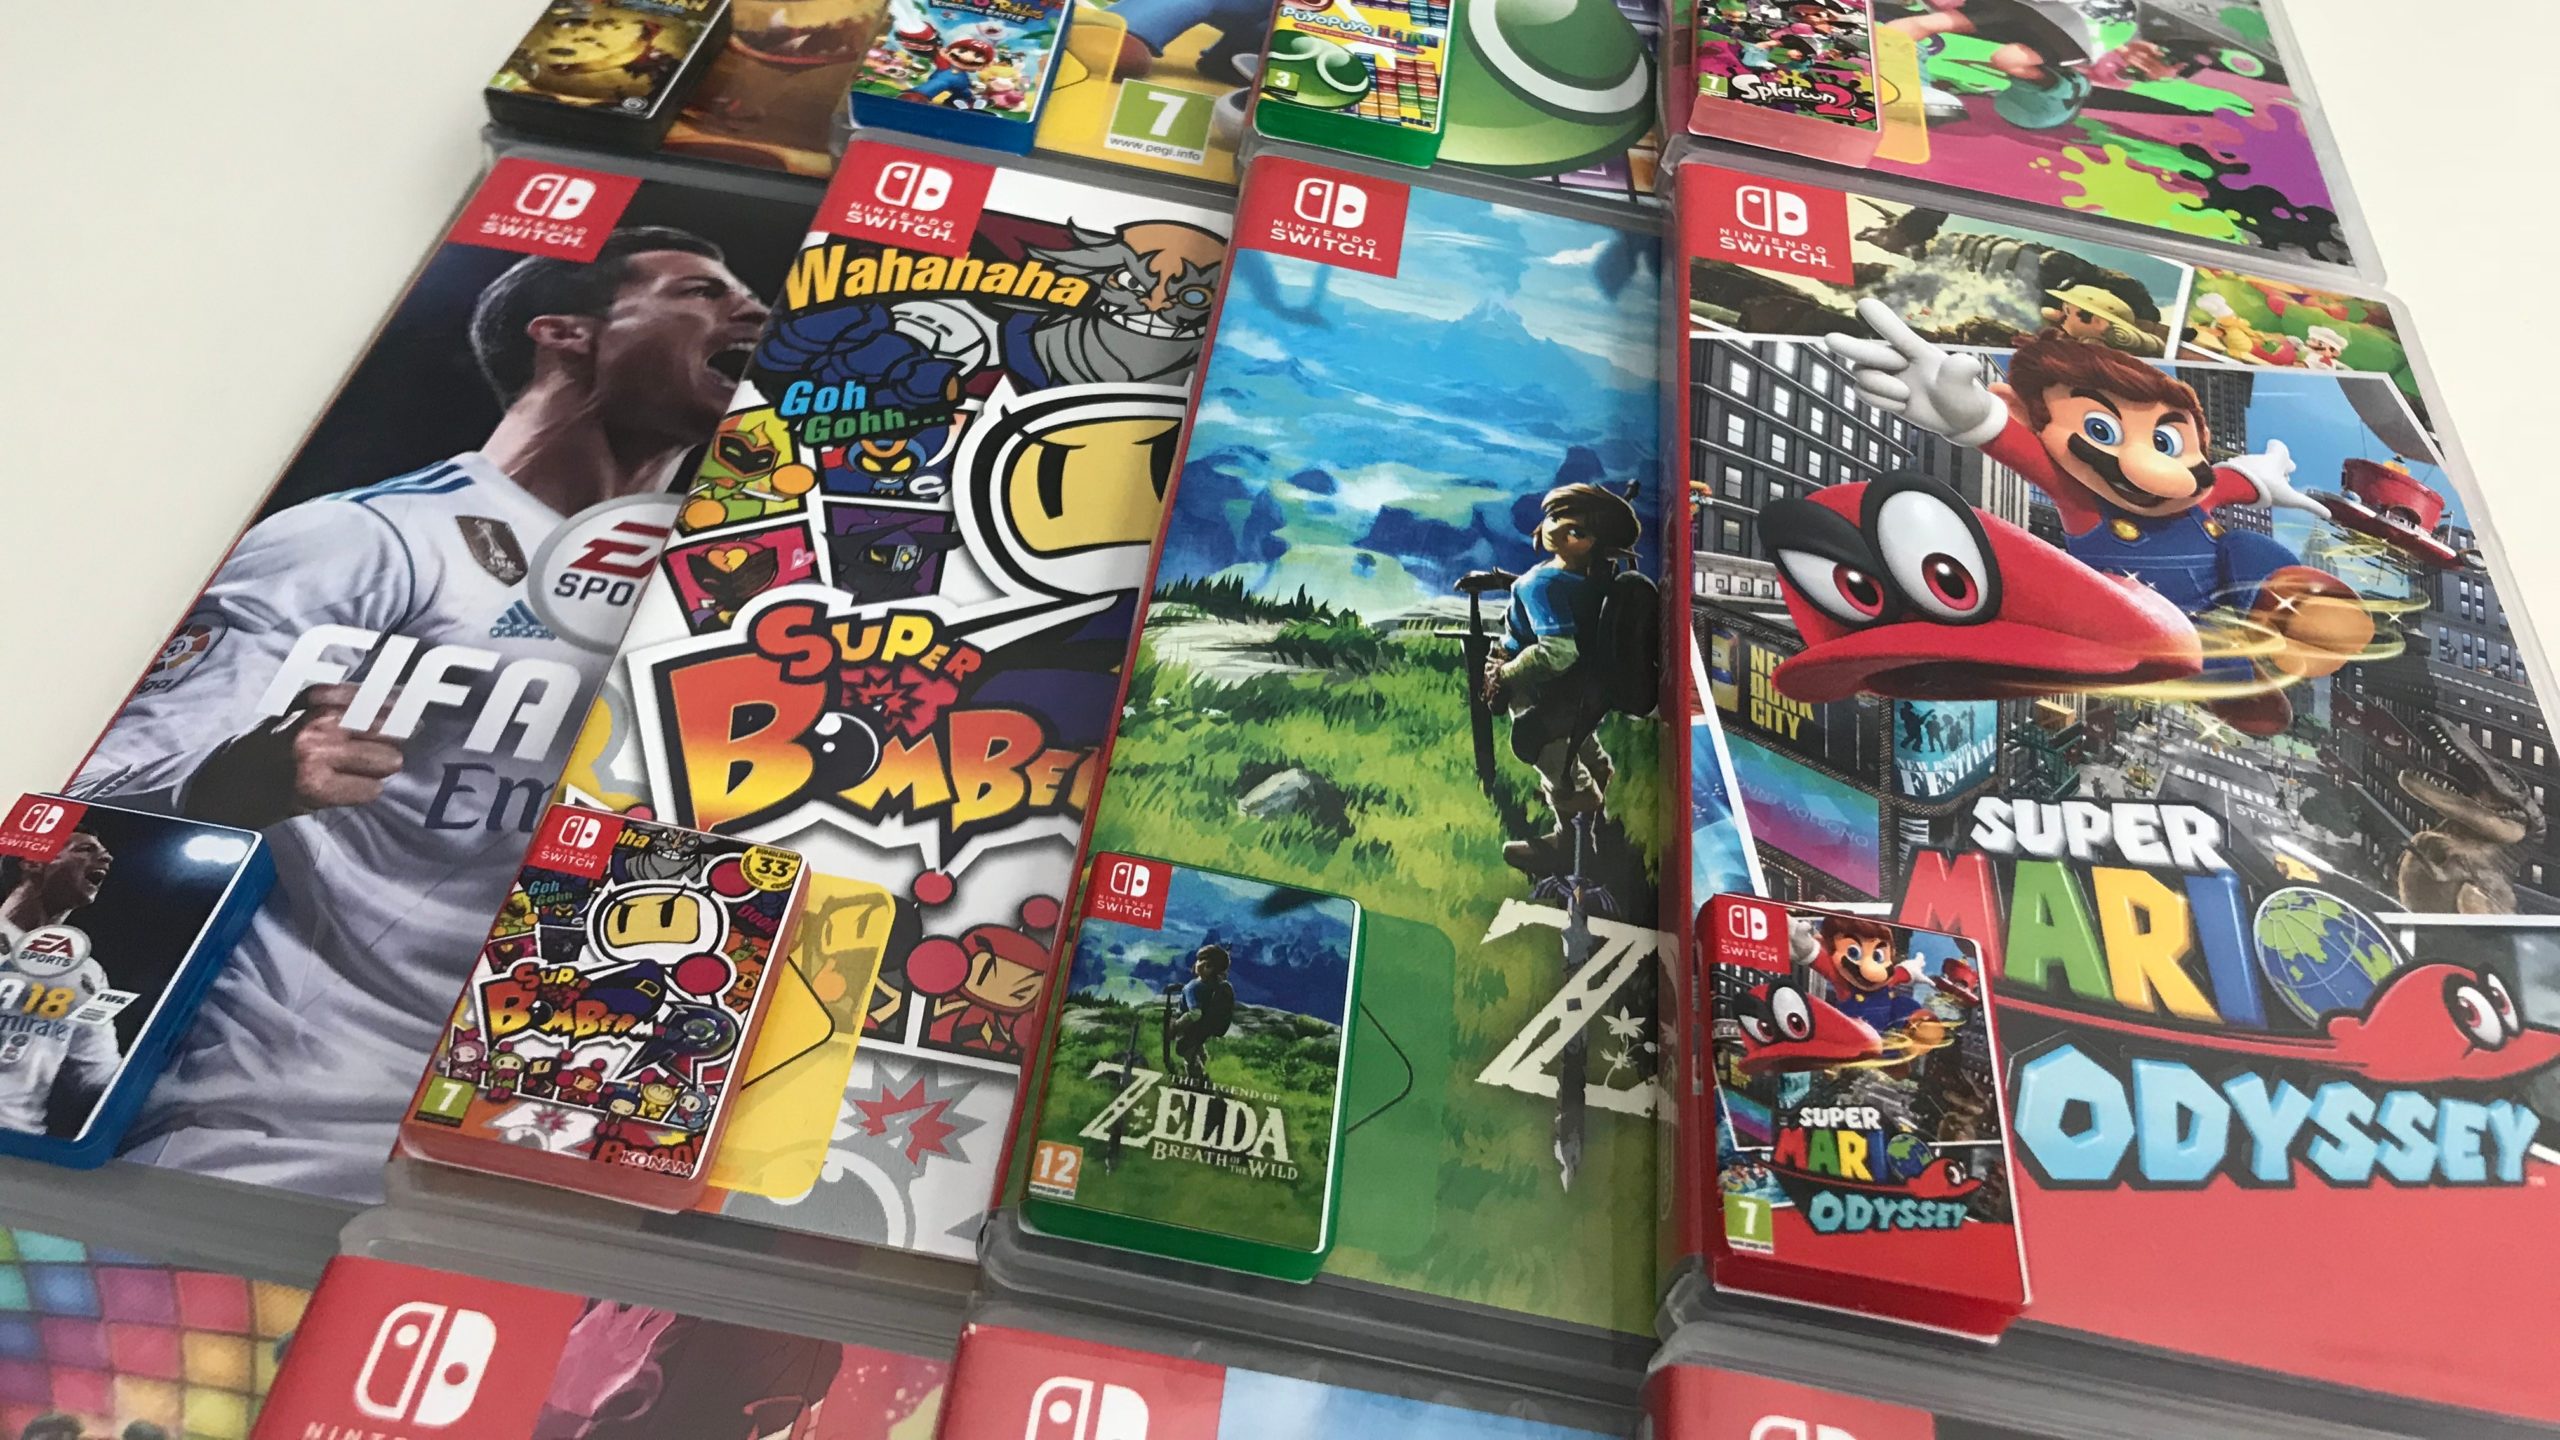 The Tiniest Lil’ Nintendo Switch Game Cases